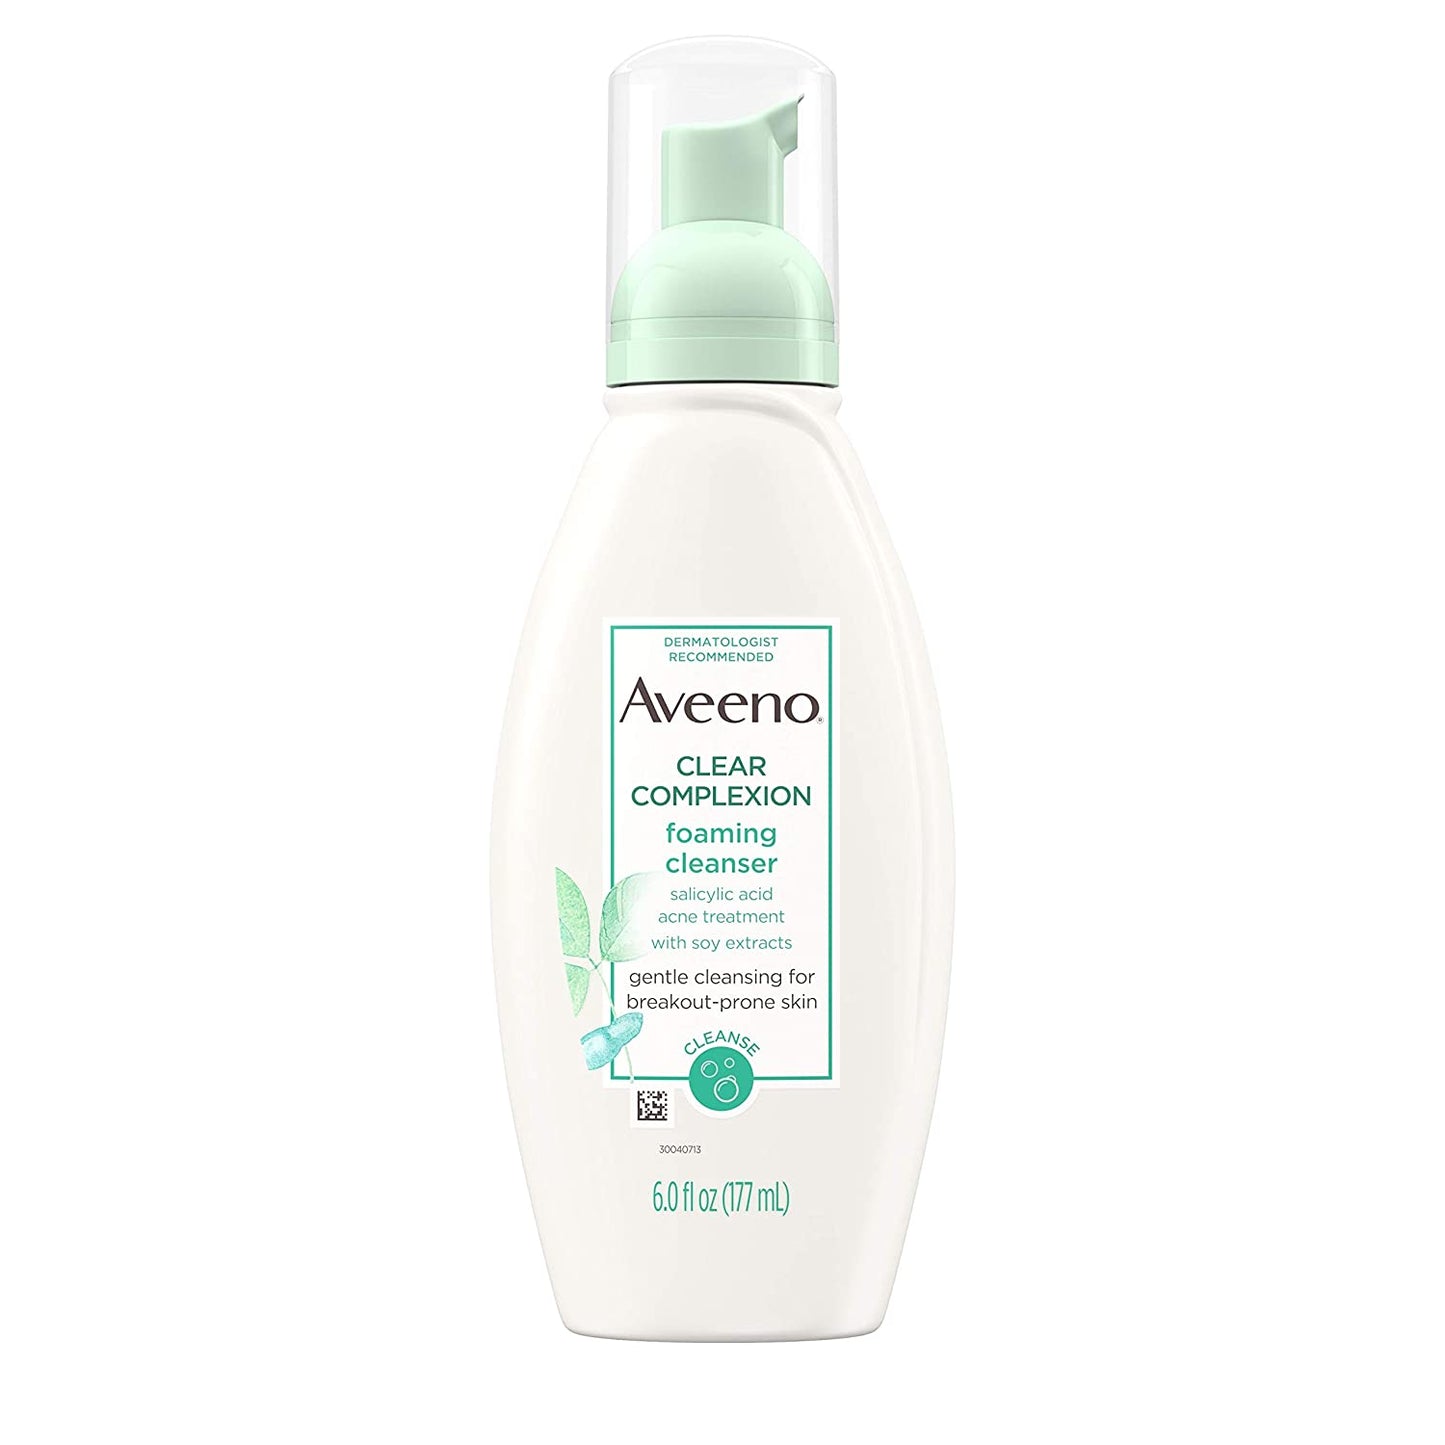 Aveeno Clear Complexion Foaming Cleanser 177ml (Packaging may Vary)